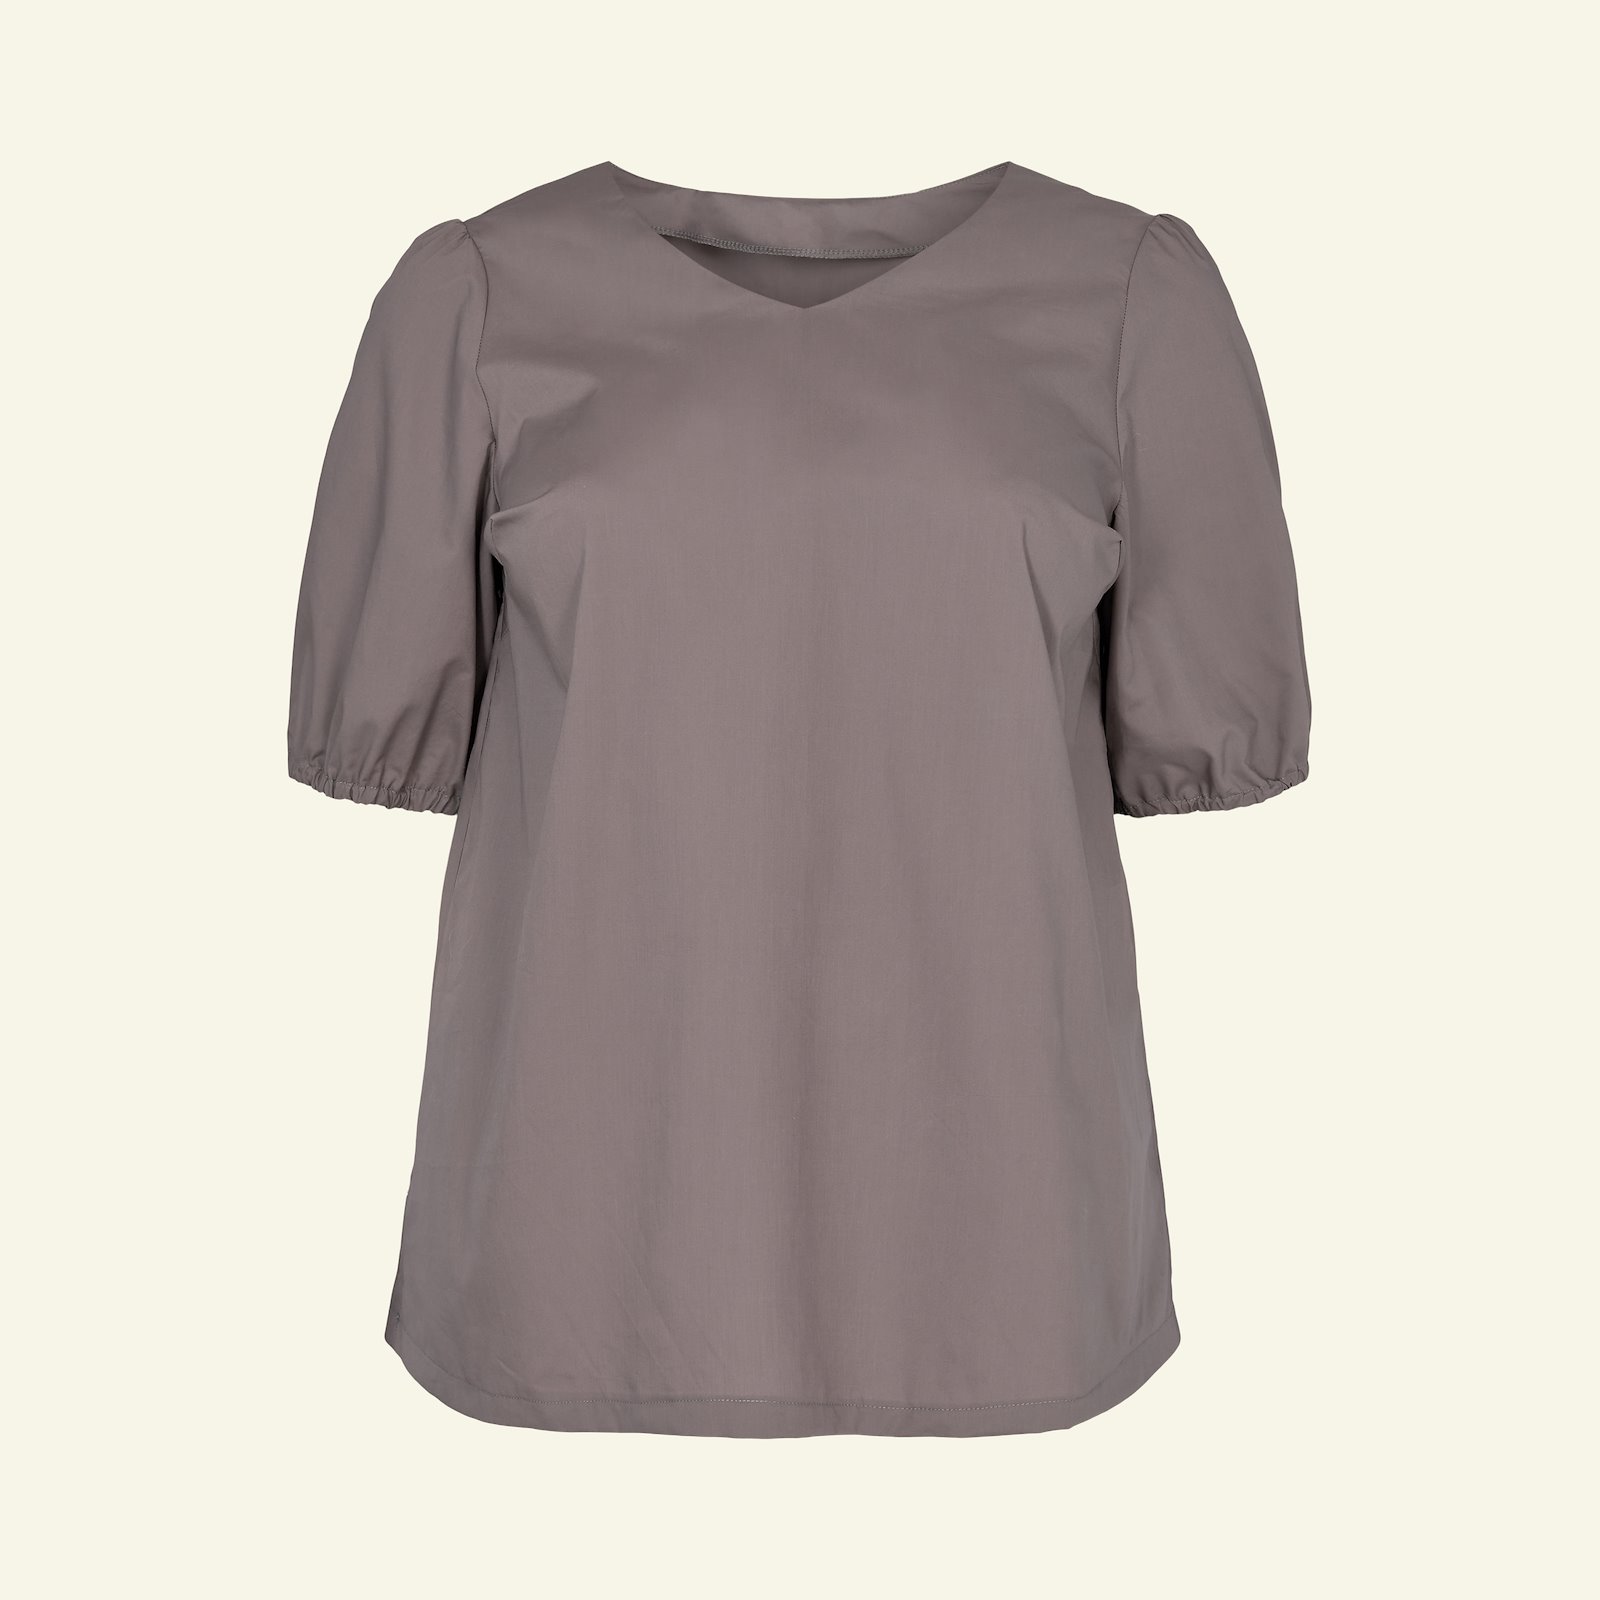 Blouse with long and short sleeve, 54/26 p72006_540121_sskit